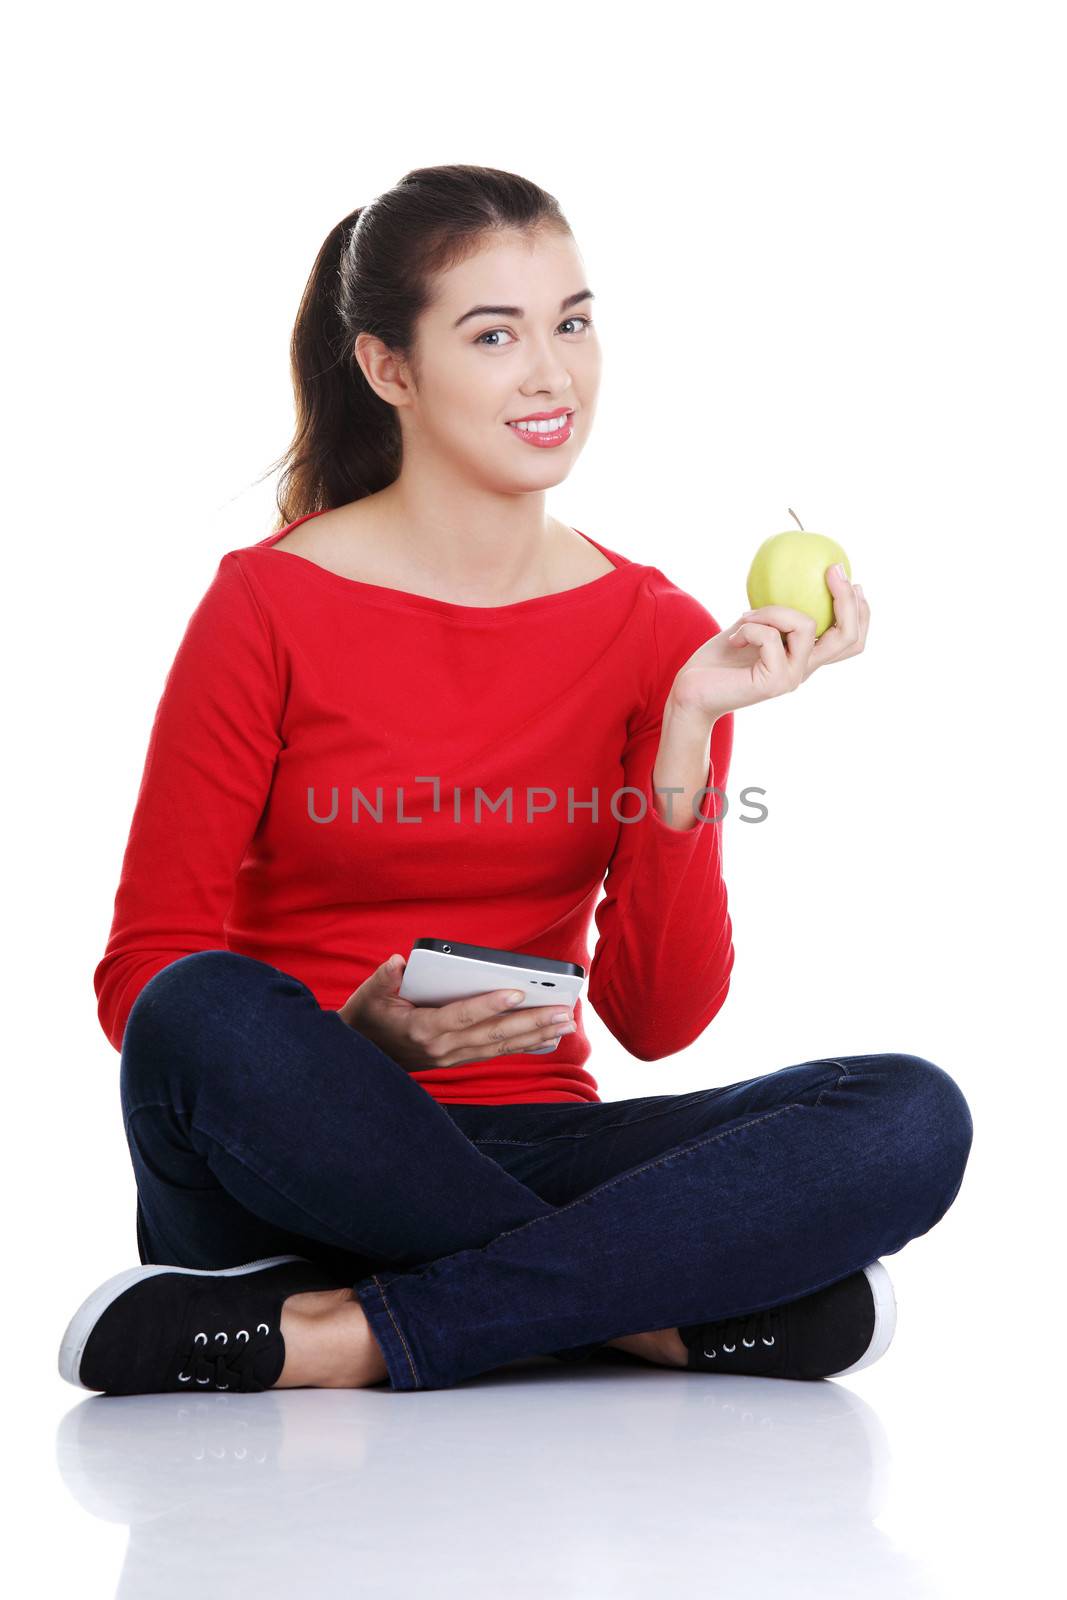 Woman with apple and tablet computer. Isolated on white background.